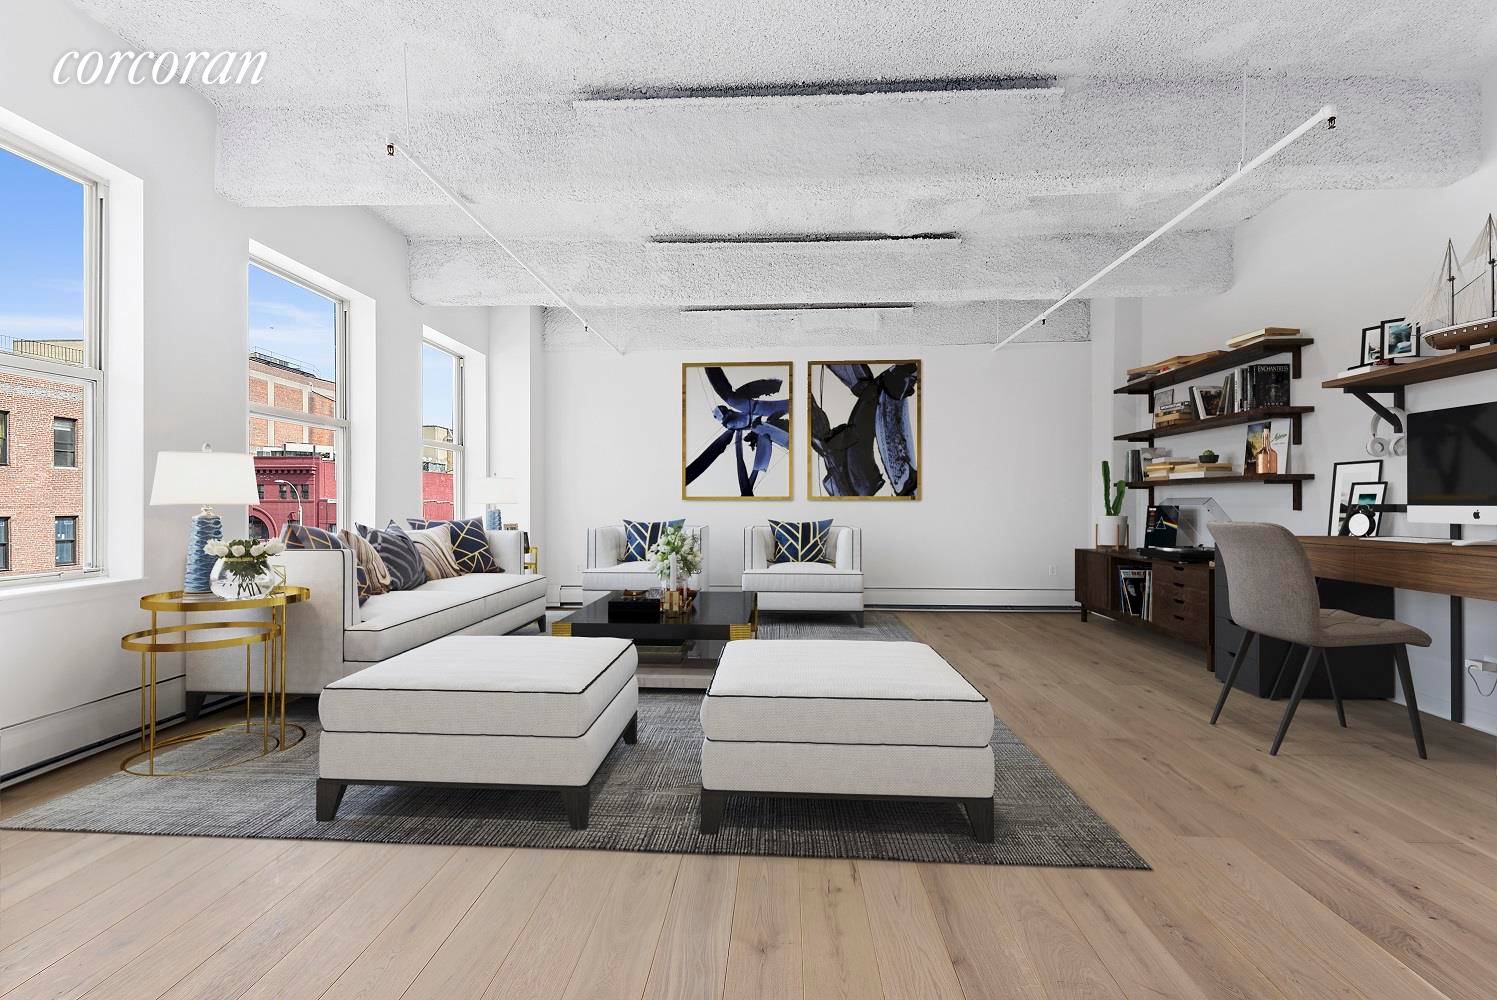 No Fee Sprawling and unique 1500sf authentic loft space large separate sleeping alcove, Midtown Manhattan view and gallery style living design.